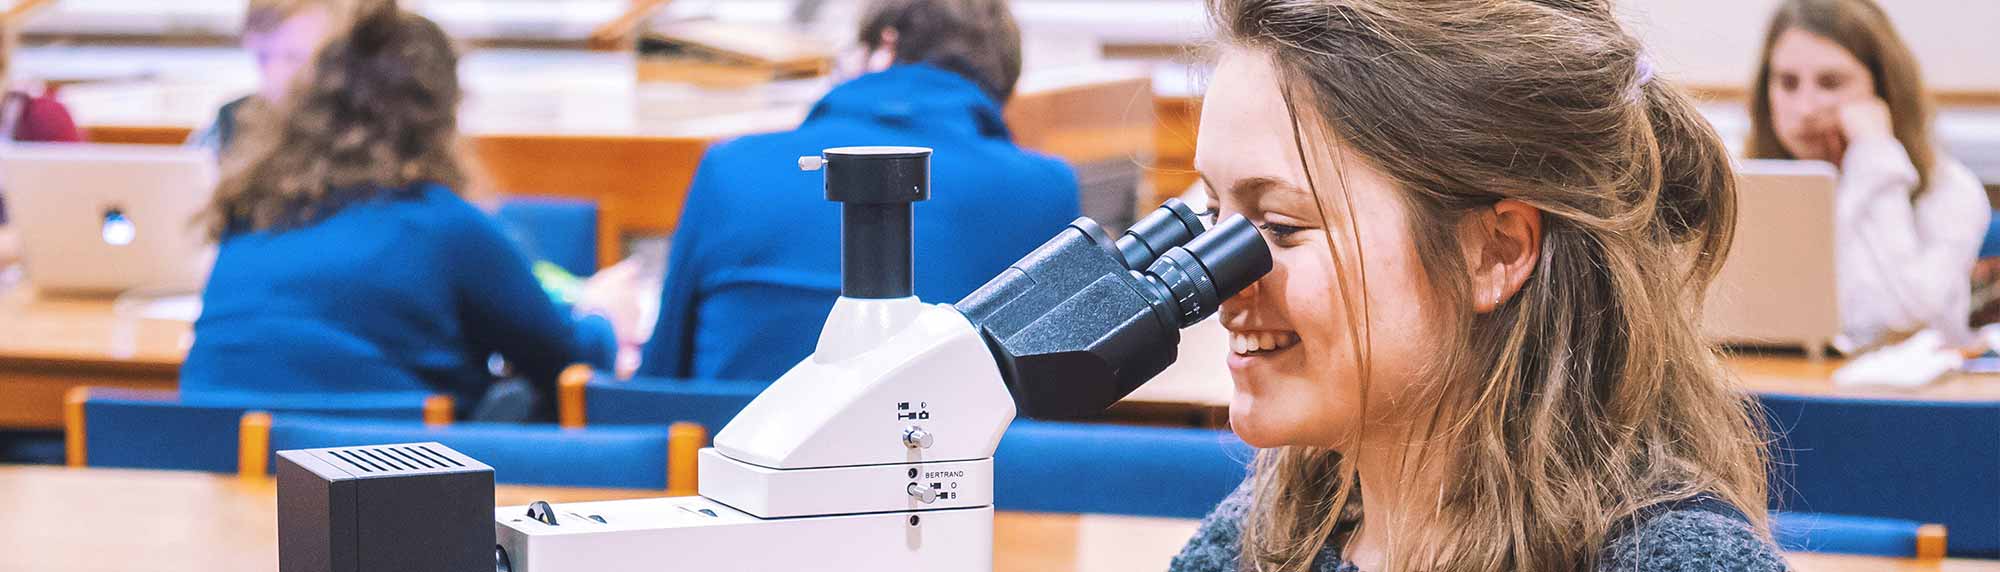 student using microscope in class